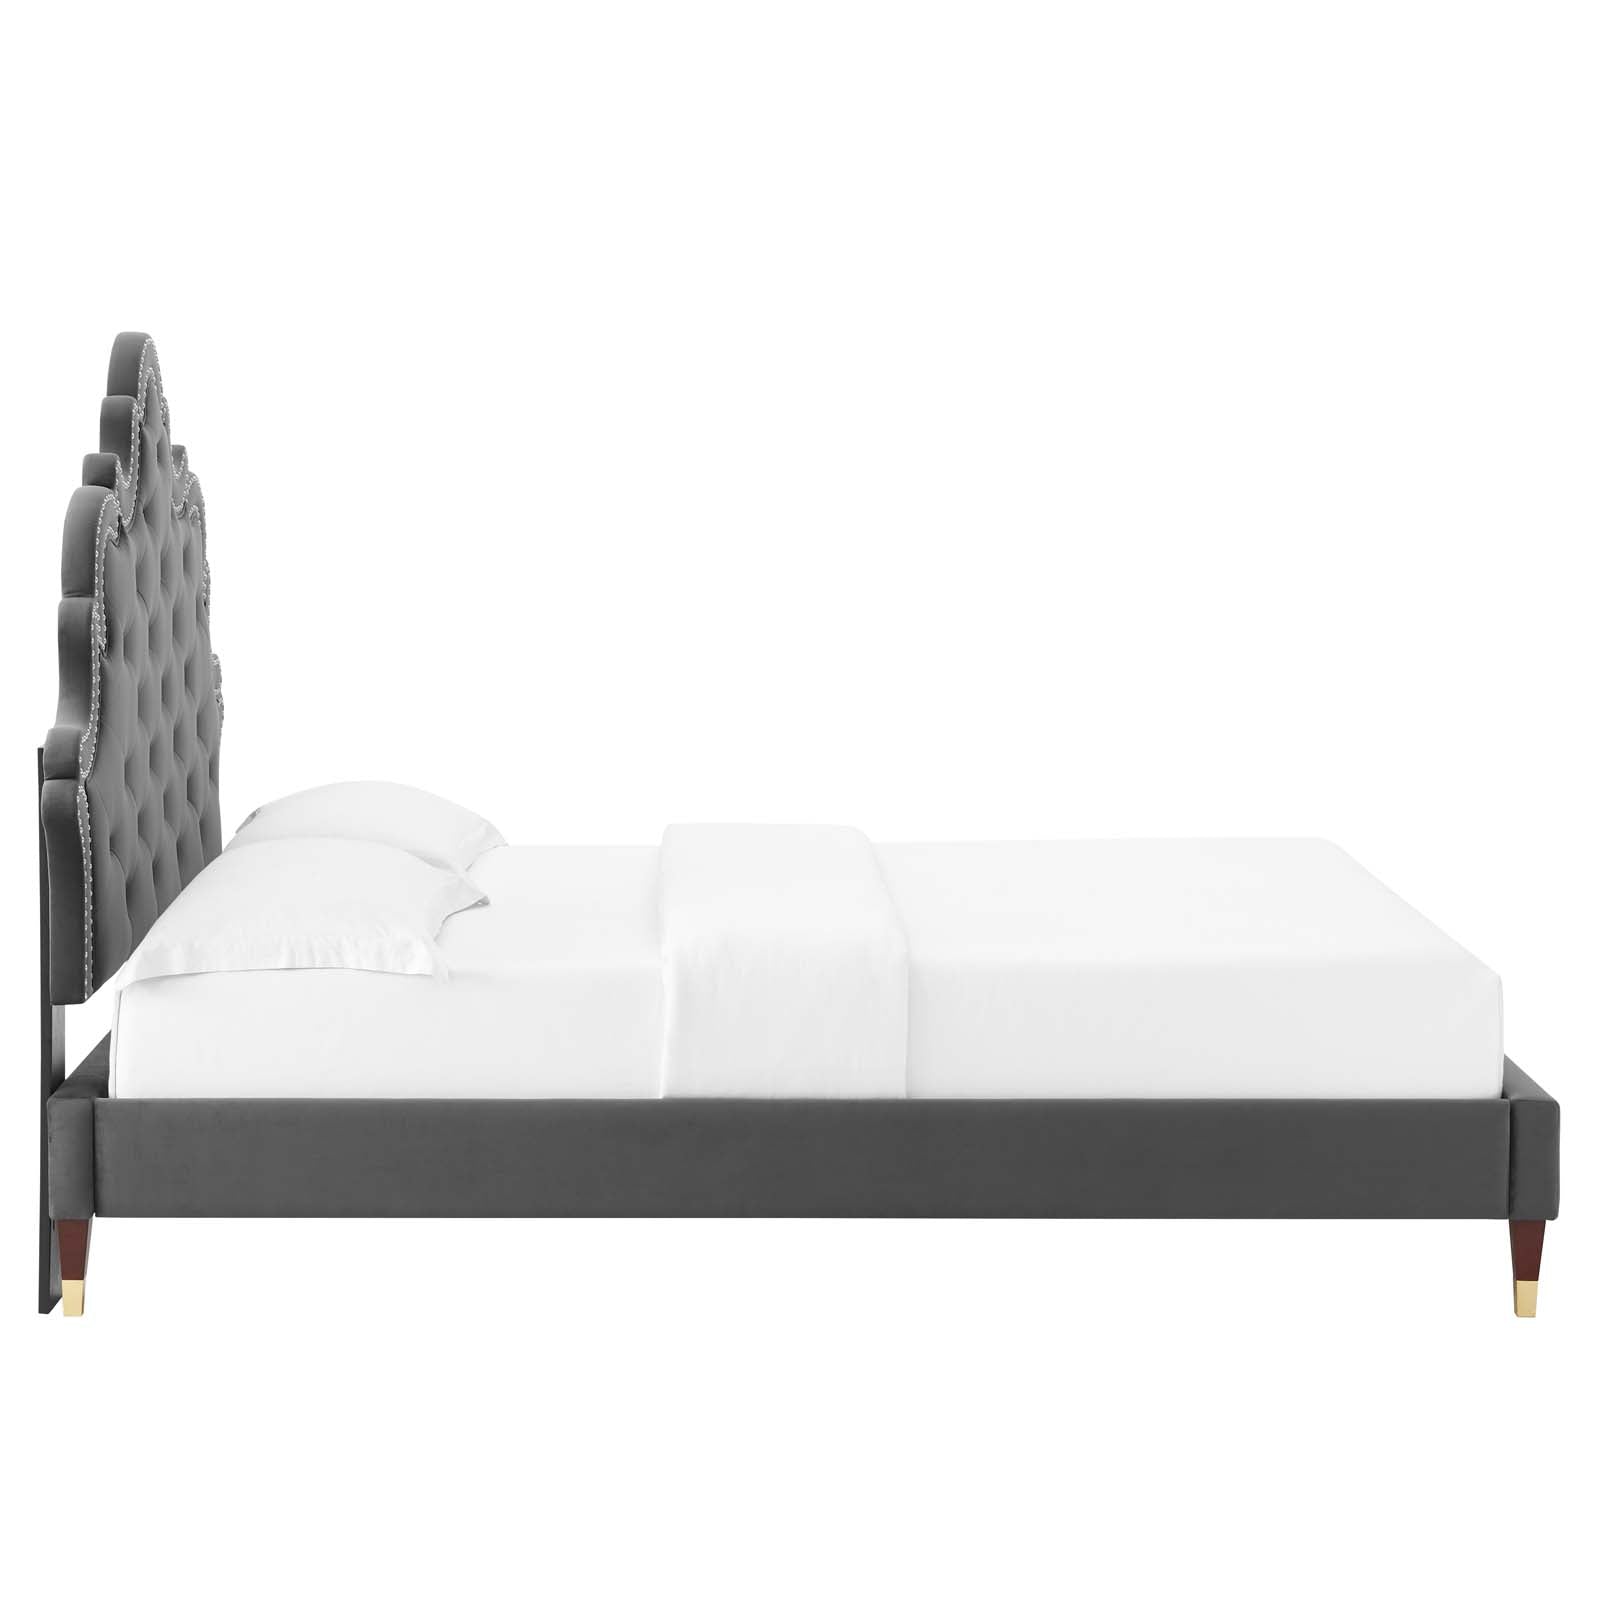 Modway Beds - Sasha Button-Tufted Performance Velvet King Bed Charcoal